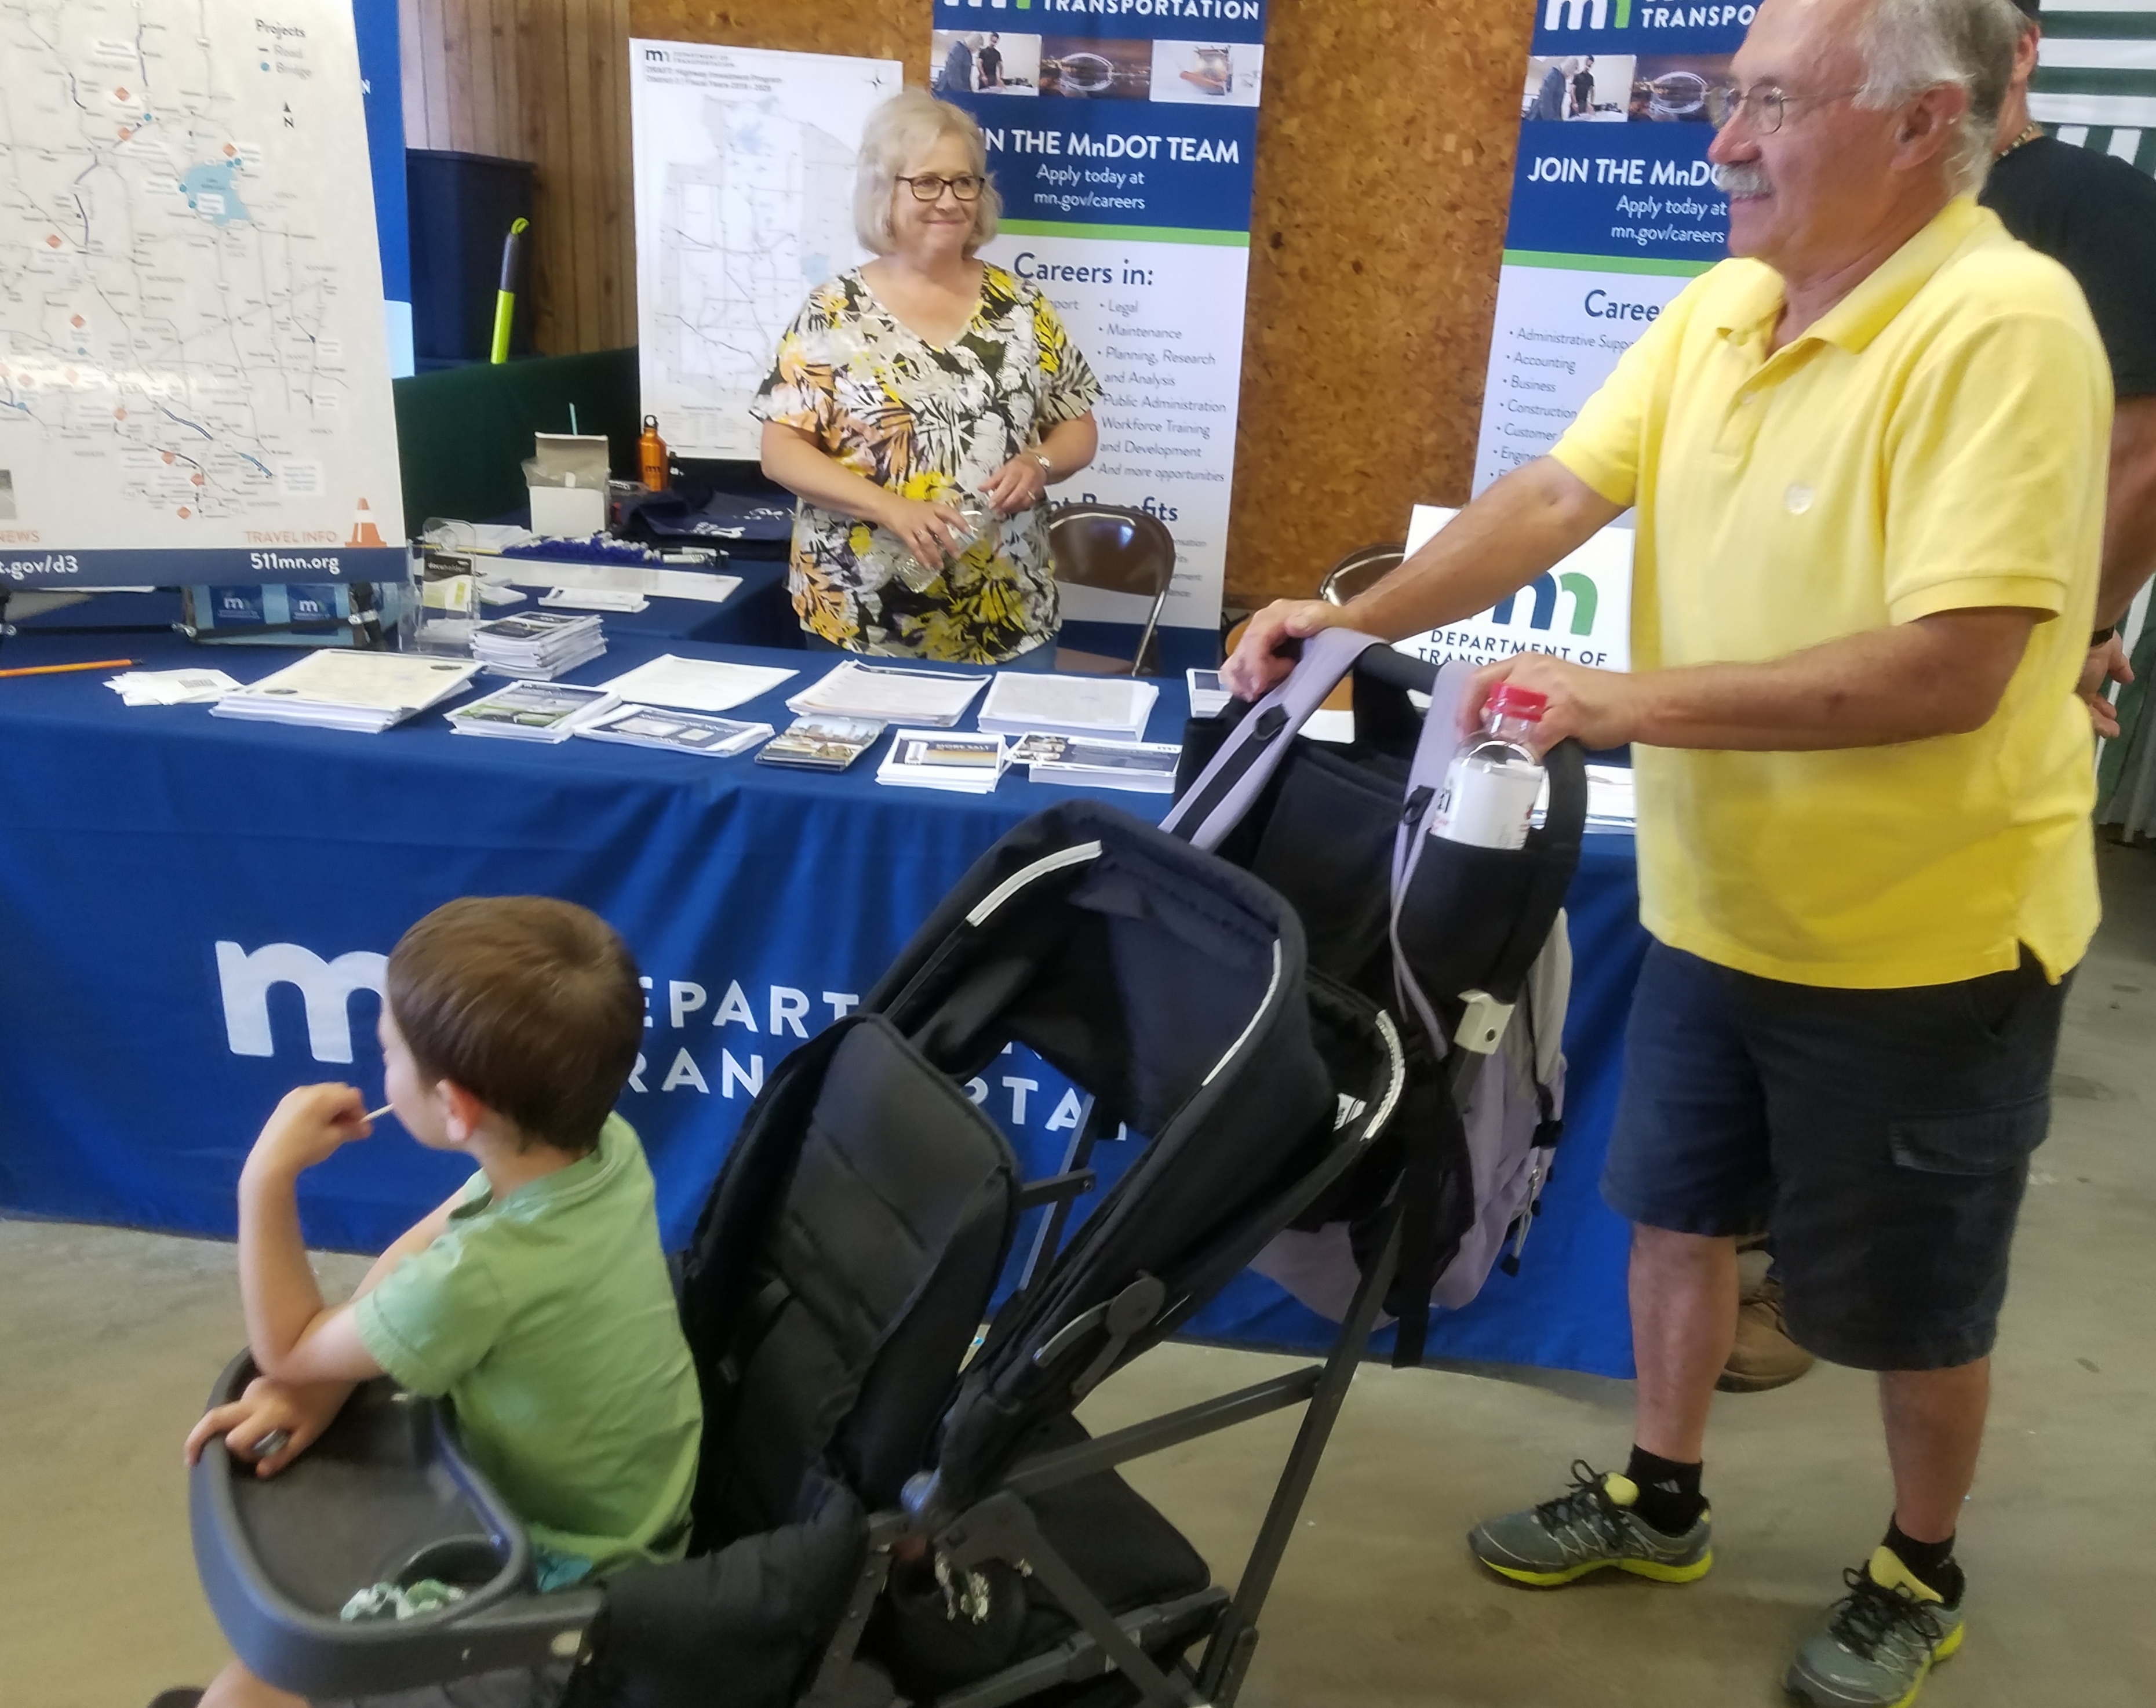 Cindy Aselson looks on as a man pushes a stroller past the MnDOT booth at the crow wing county fair